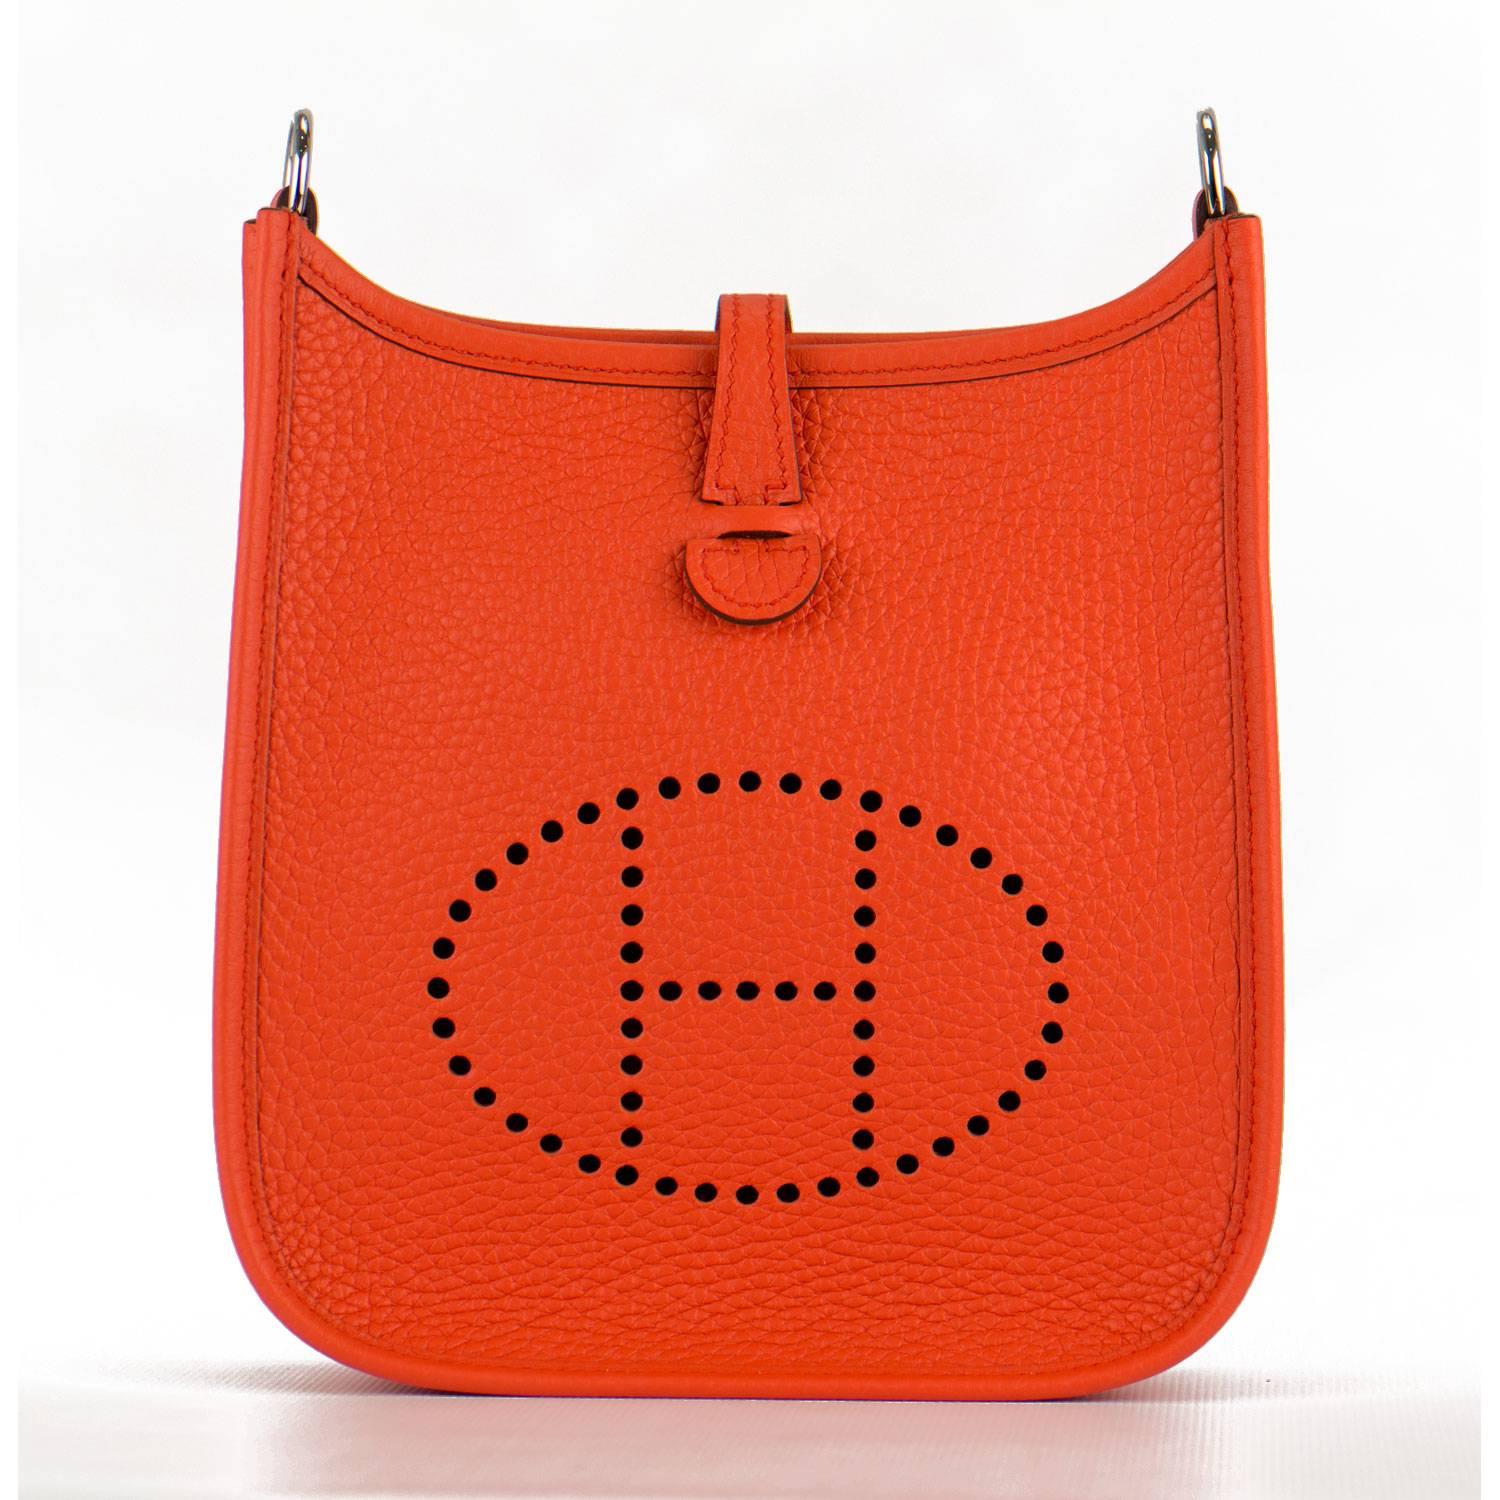 Hermes Evelyne 16 Amazone Taurillon Clemence/Sangle Wool y Unie Capuccine Palladium Hardware 2016

Bougth it in hermes store in 2016.

Pre-owned and never used.

Model: Evelyne Amazone 16 CM.

Color: Capuccine.

Details:

 *Protective